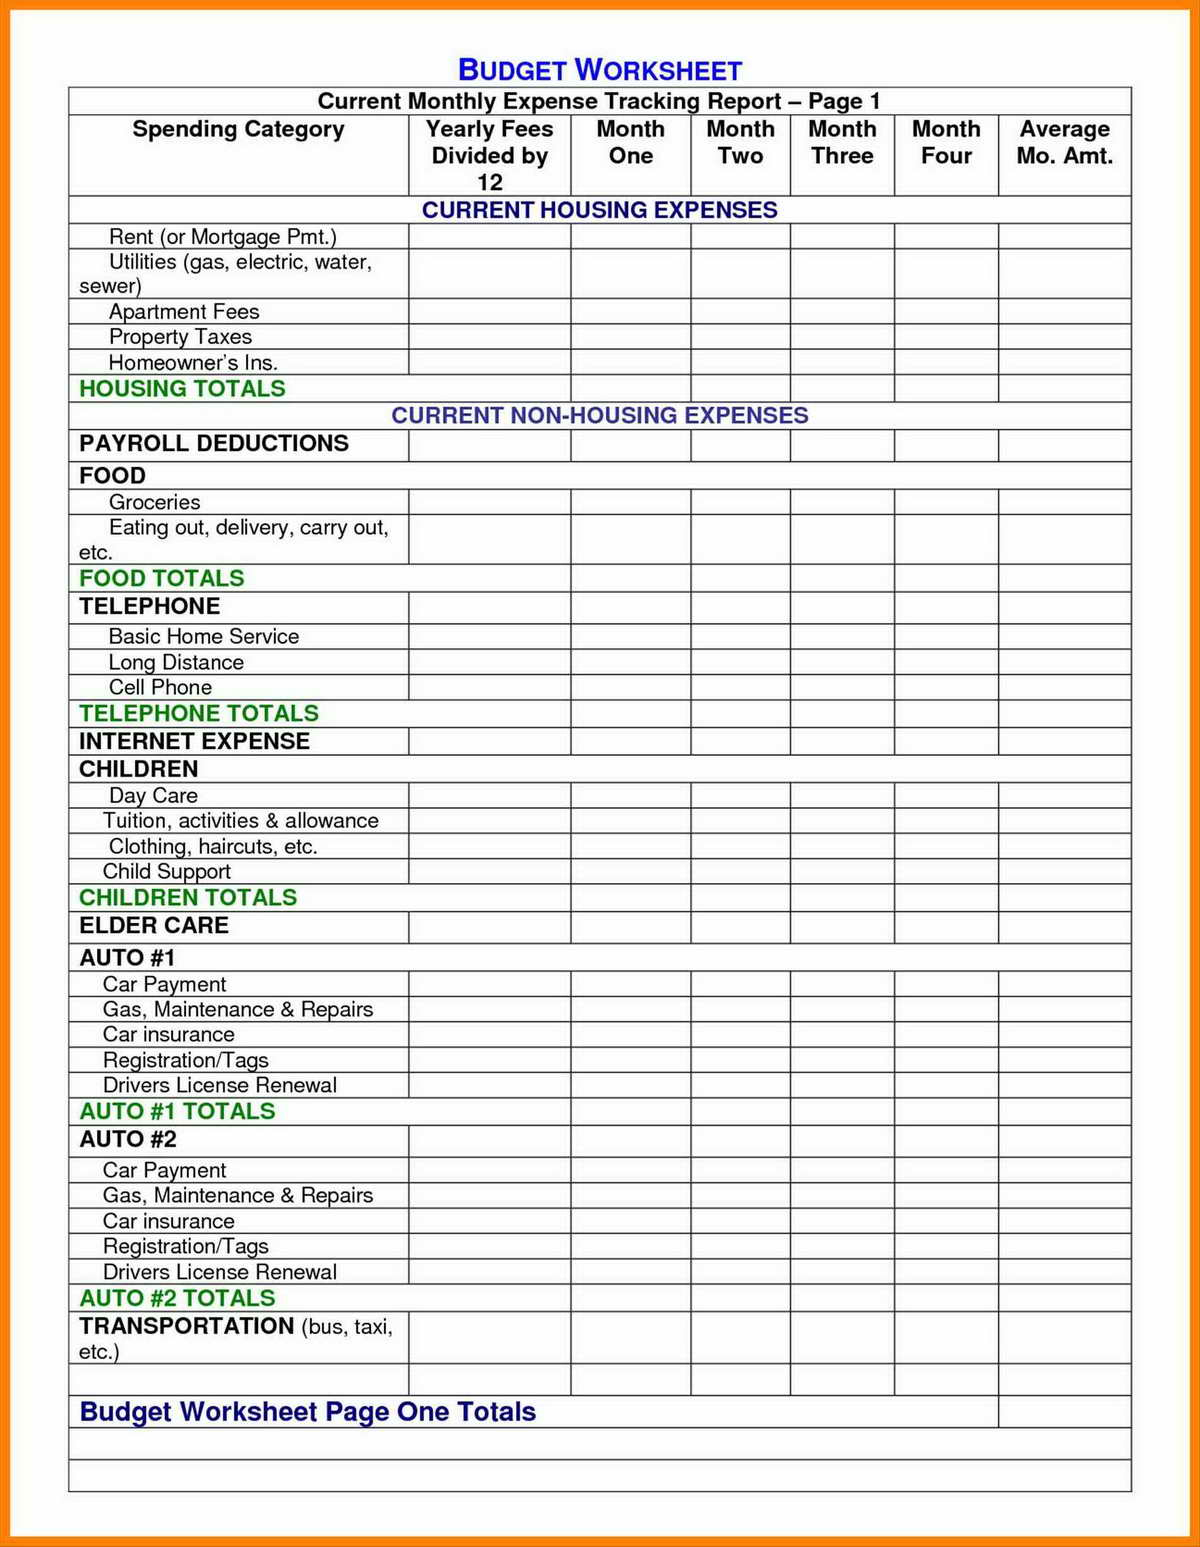 Small Business Spreadsheet For Income And Expenses 2018 Google For Small Business Spreadsheet For Income And Expenses